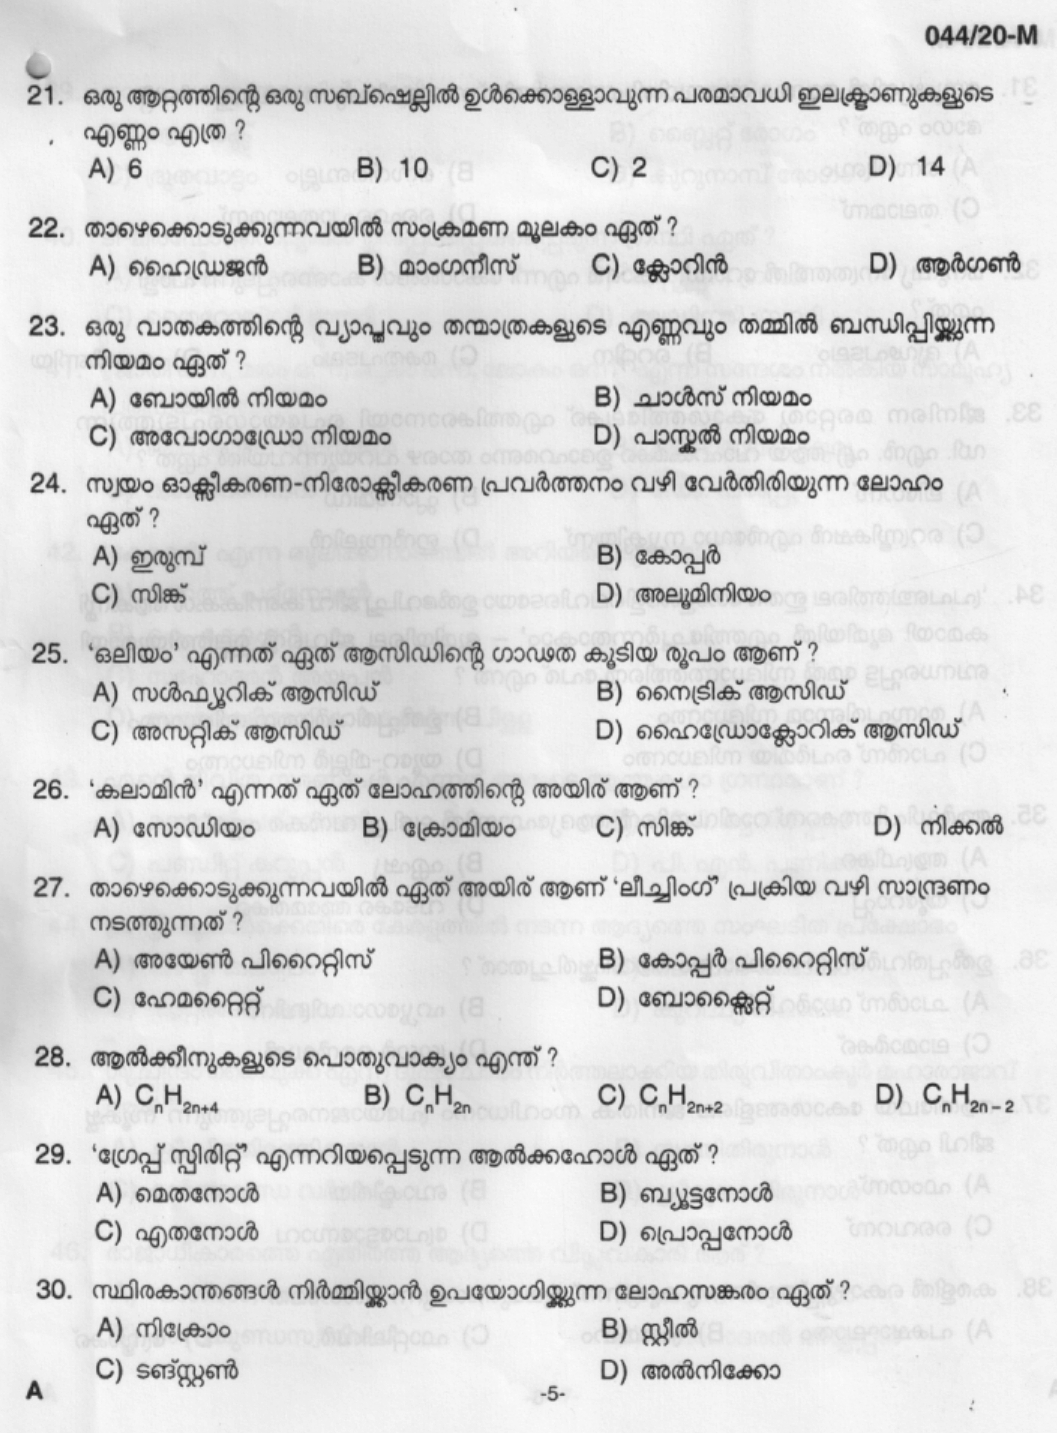 UP School Teacher Question paper with Answer Key 44/20